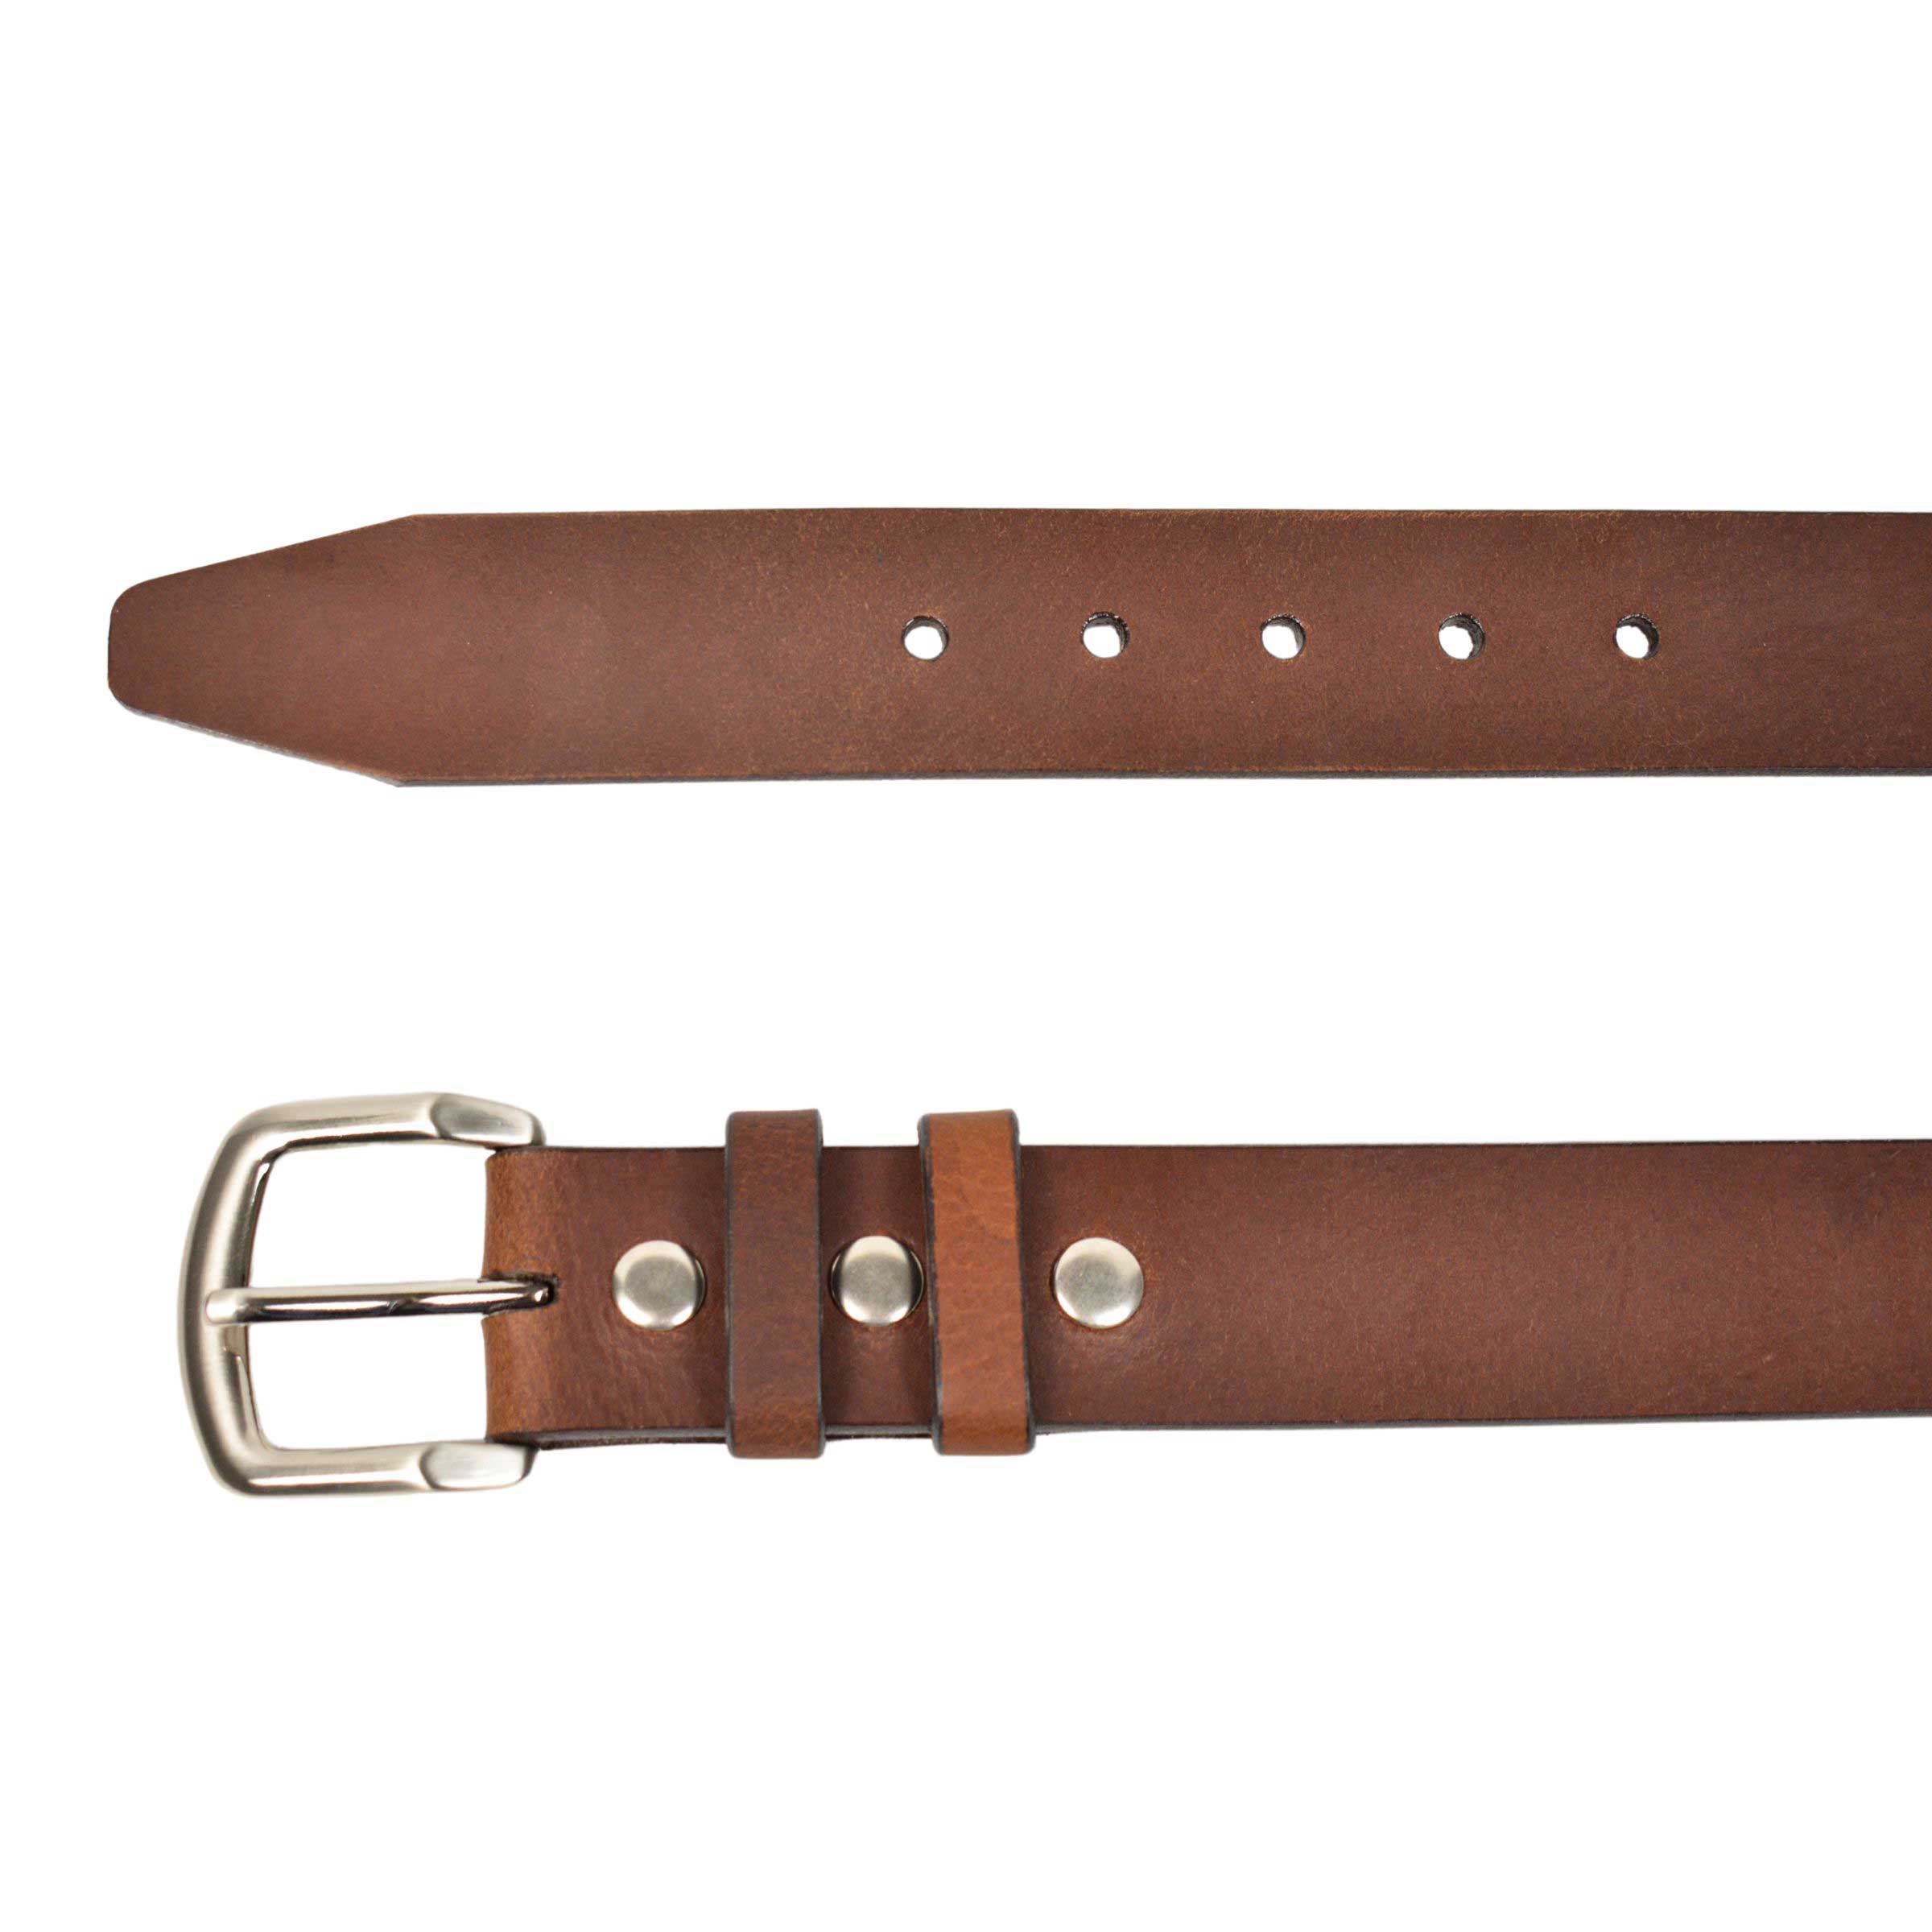 Brown oil tanned harness leather, flat hand painted black edge